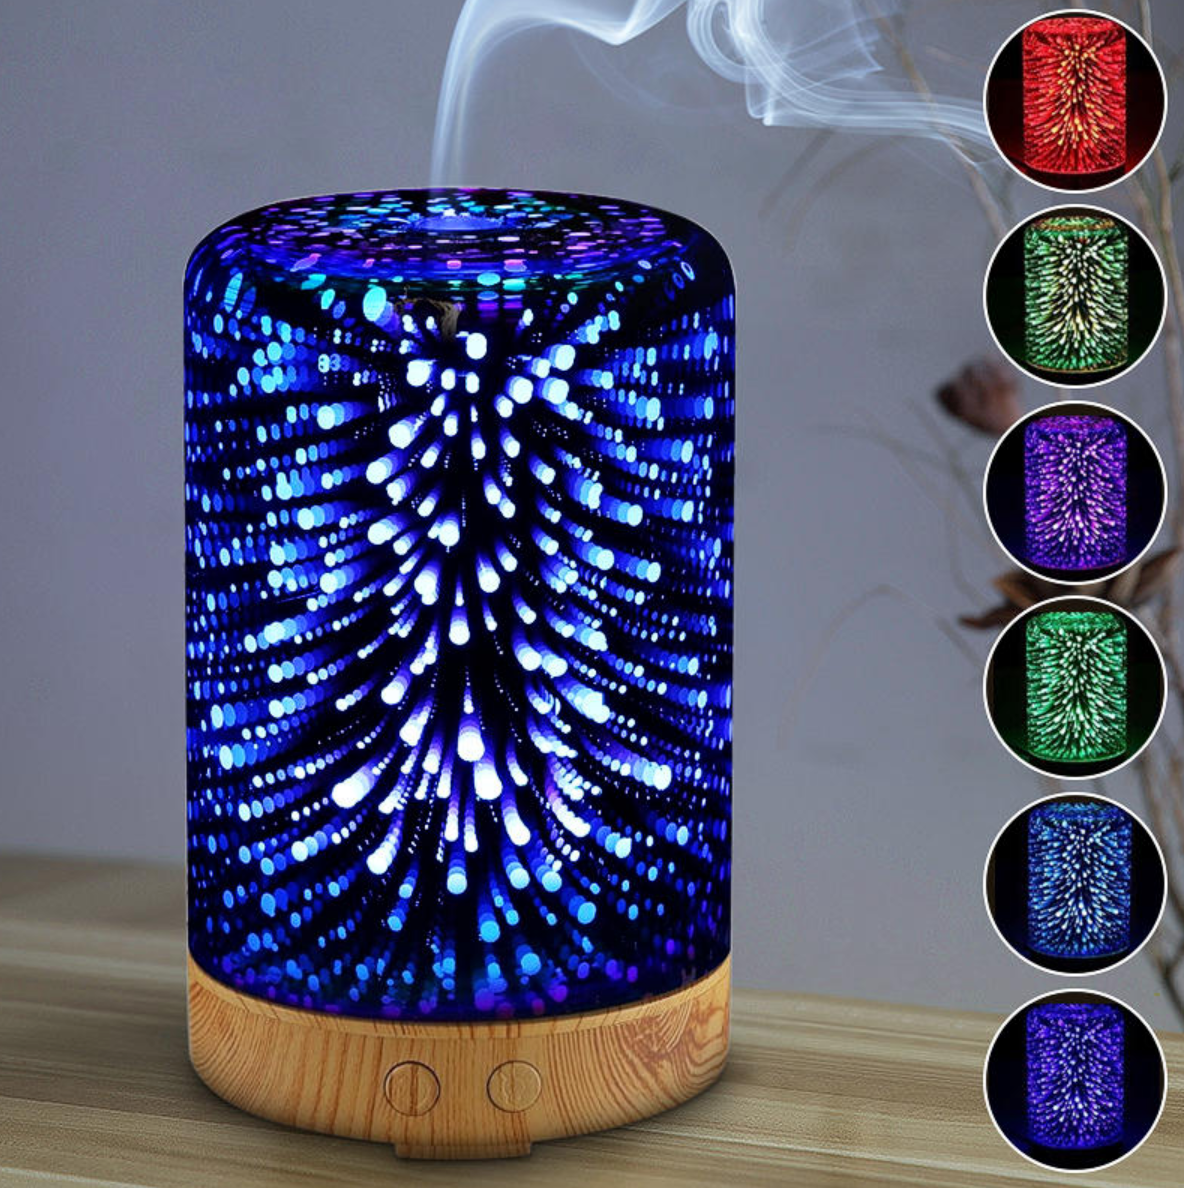 4MyHome™ Essential Oil Diffuser 3D using Electric Aromatherapy Ultrasonic Technology Cool Air Humidifier